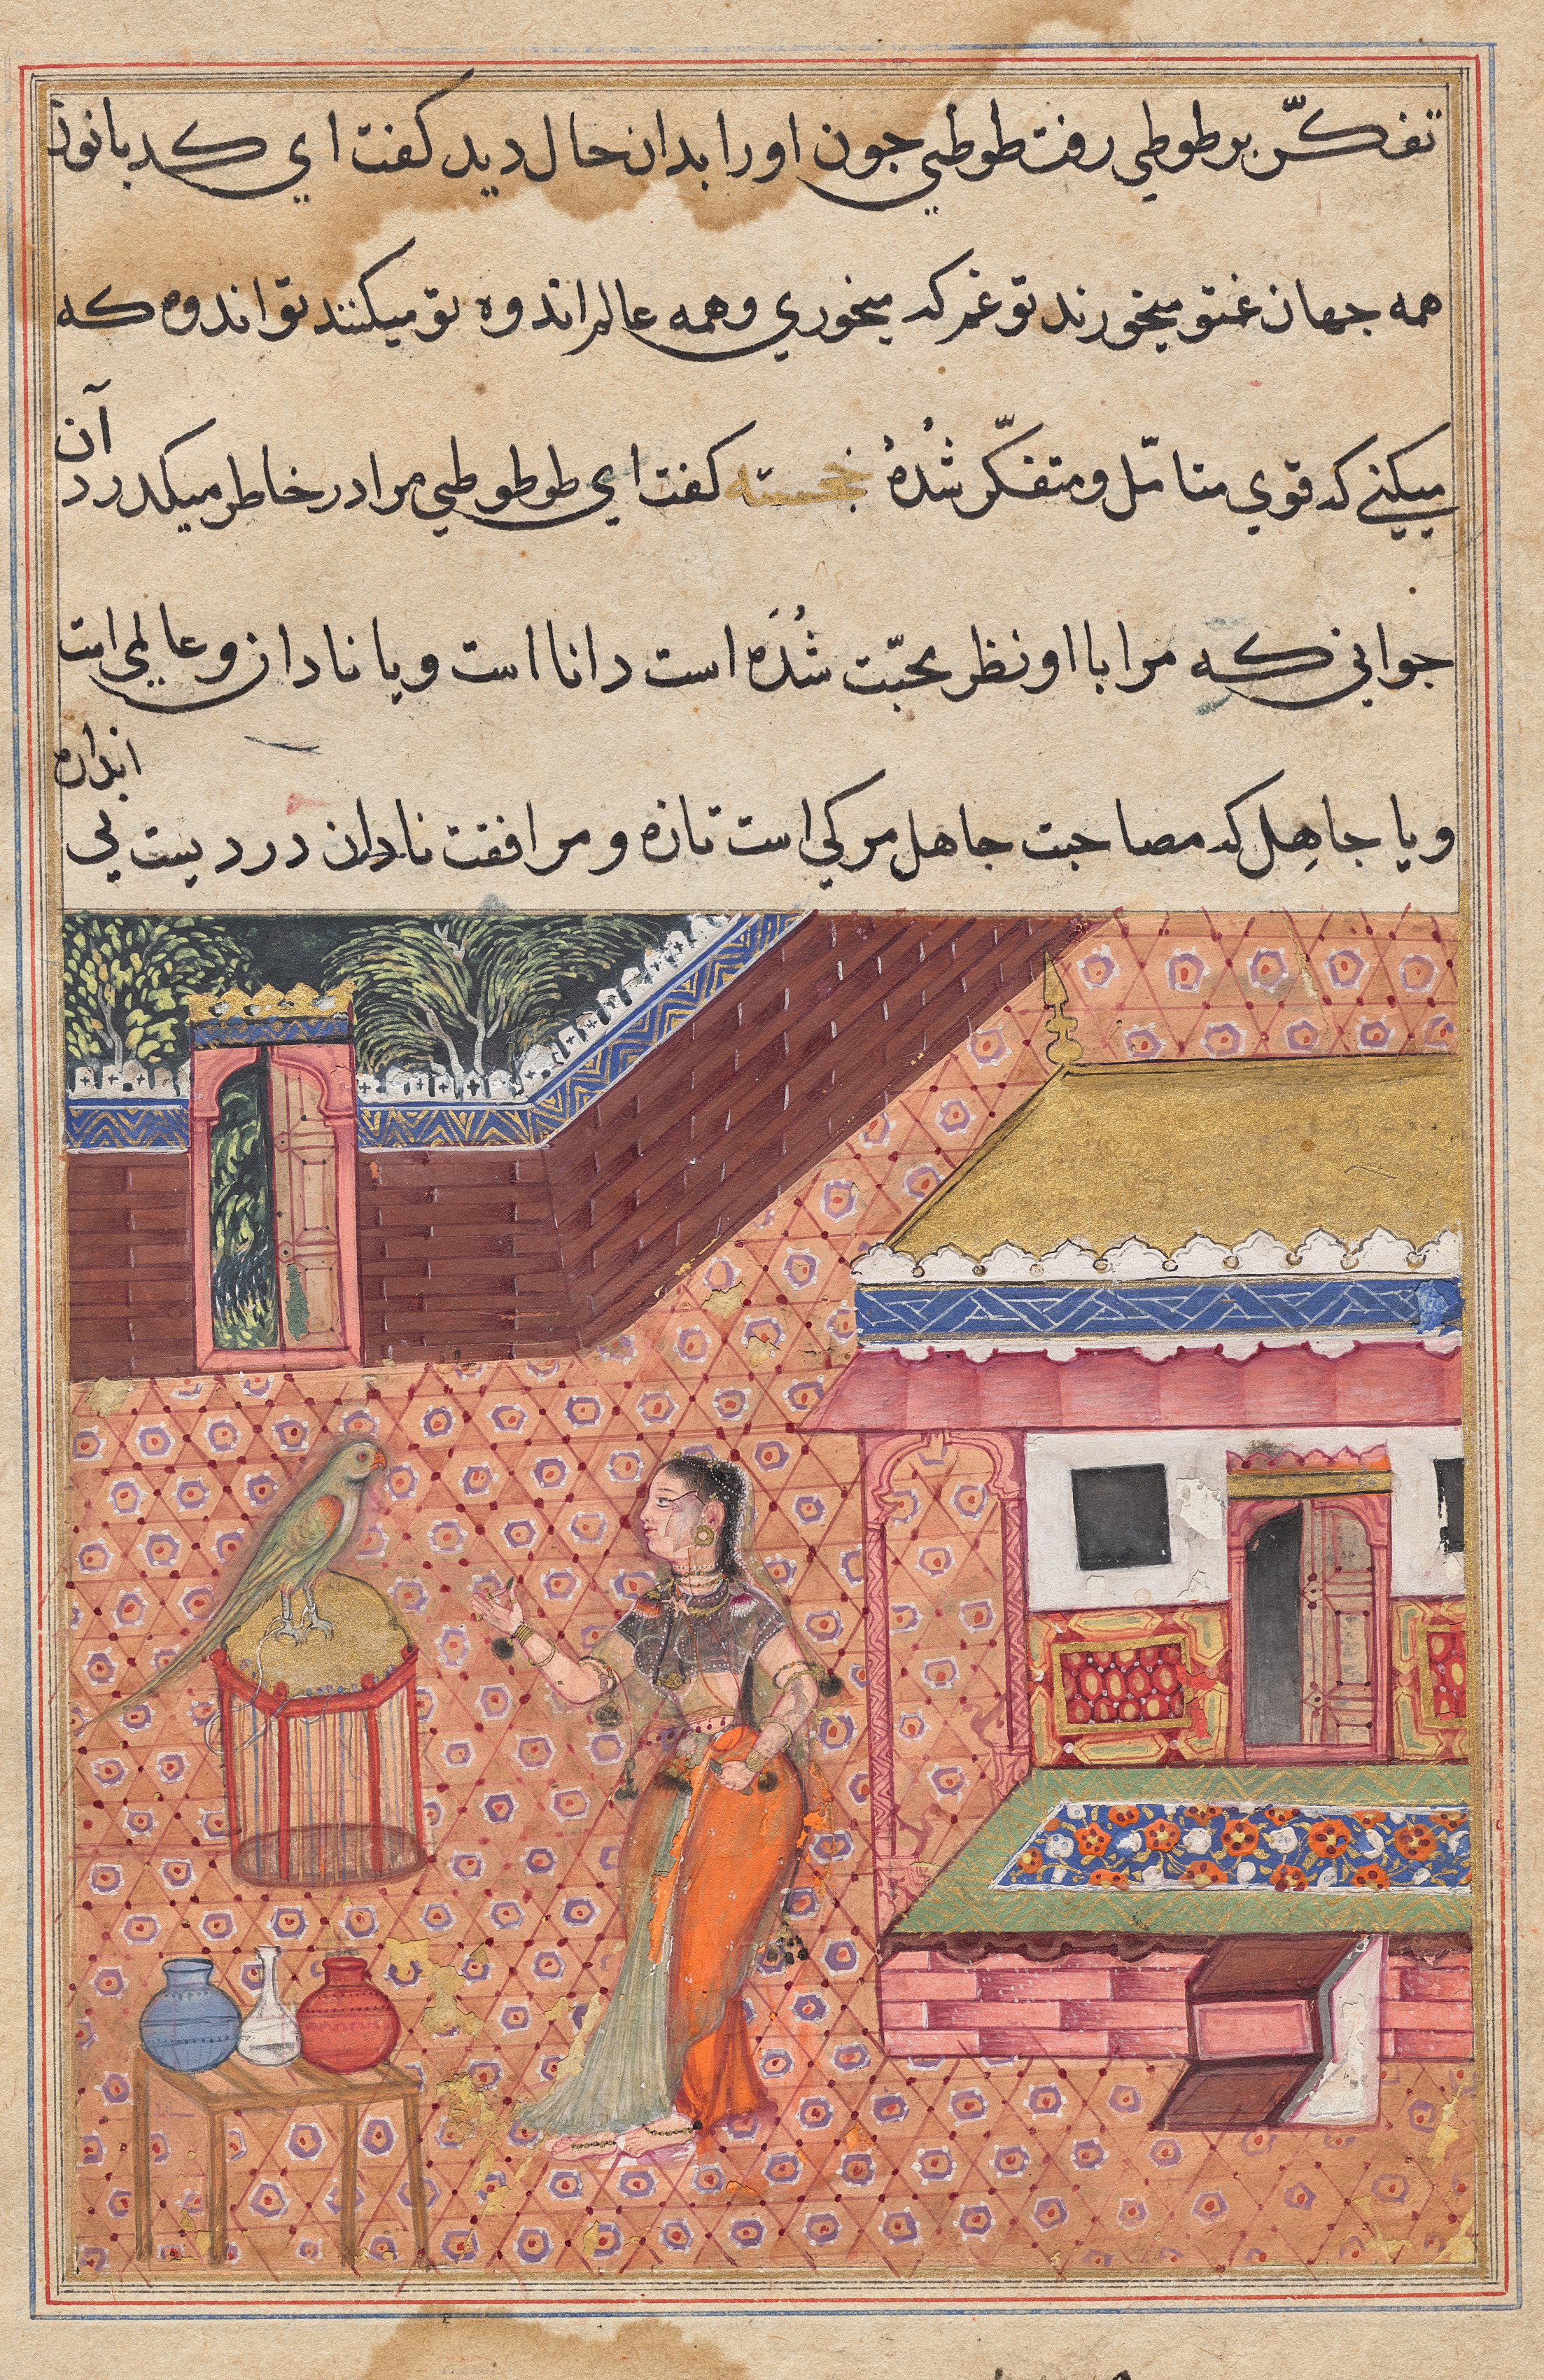 The parrot addresses Khujasta at the beginning of the thirty-fourth night, from a Tuti-nama (Tales of a Parrot)